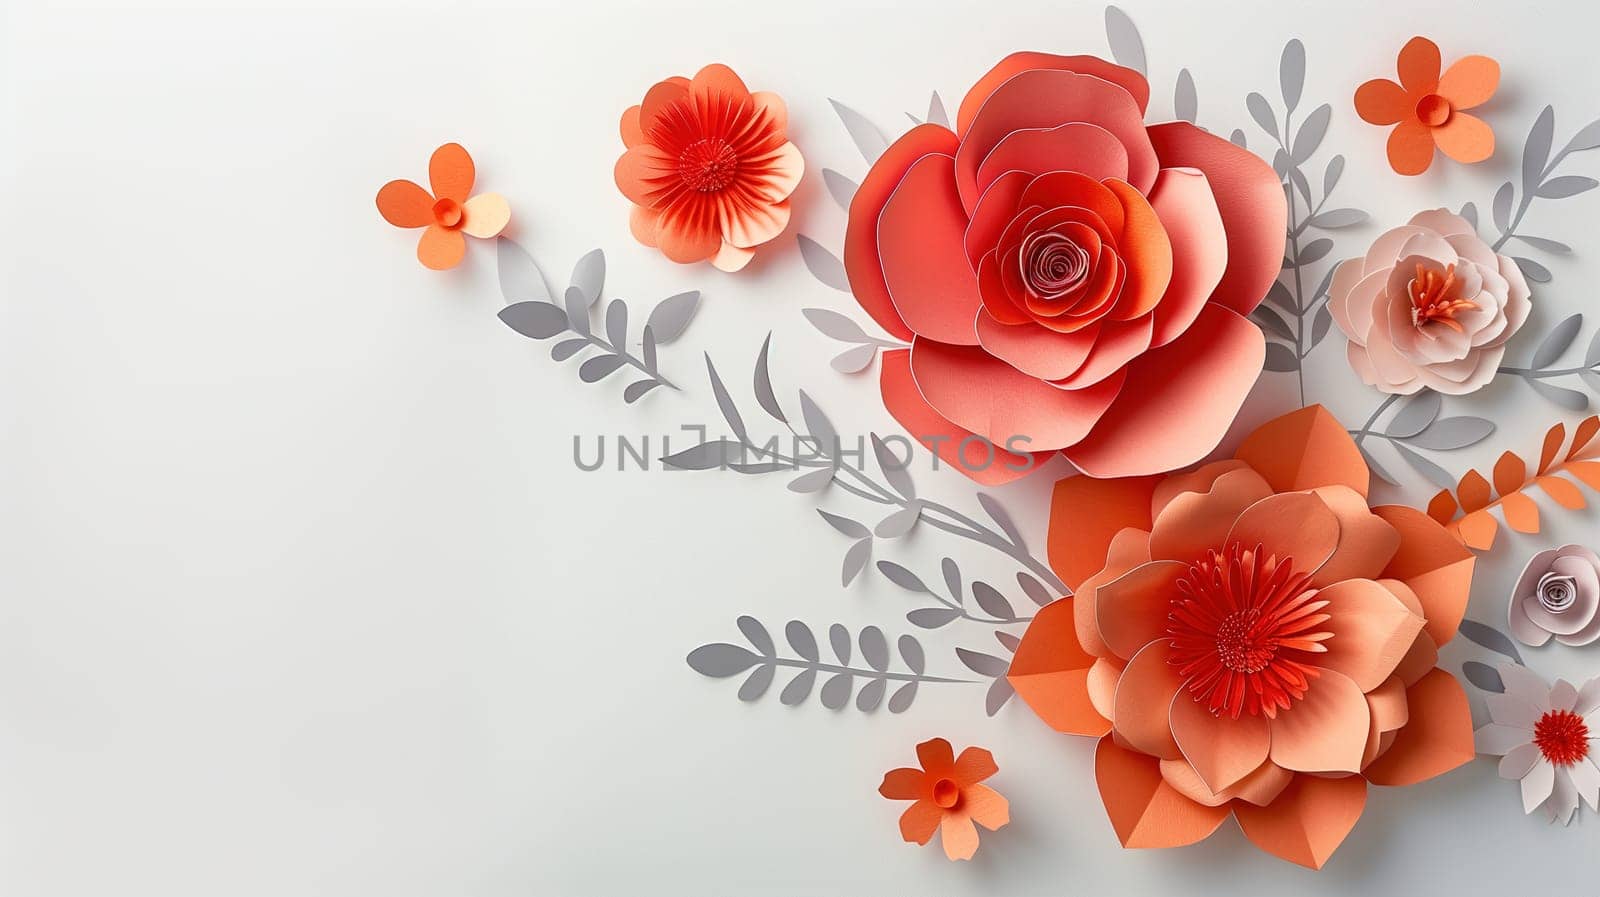 A collection of paper flowers arranged neatly on a plain white wall, creating a vibrant and decorative display. The colorful petals and intricate designs add a festive touch to the space.